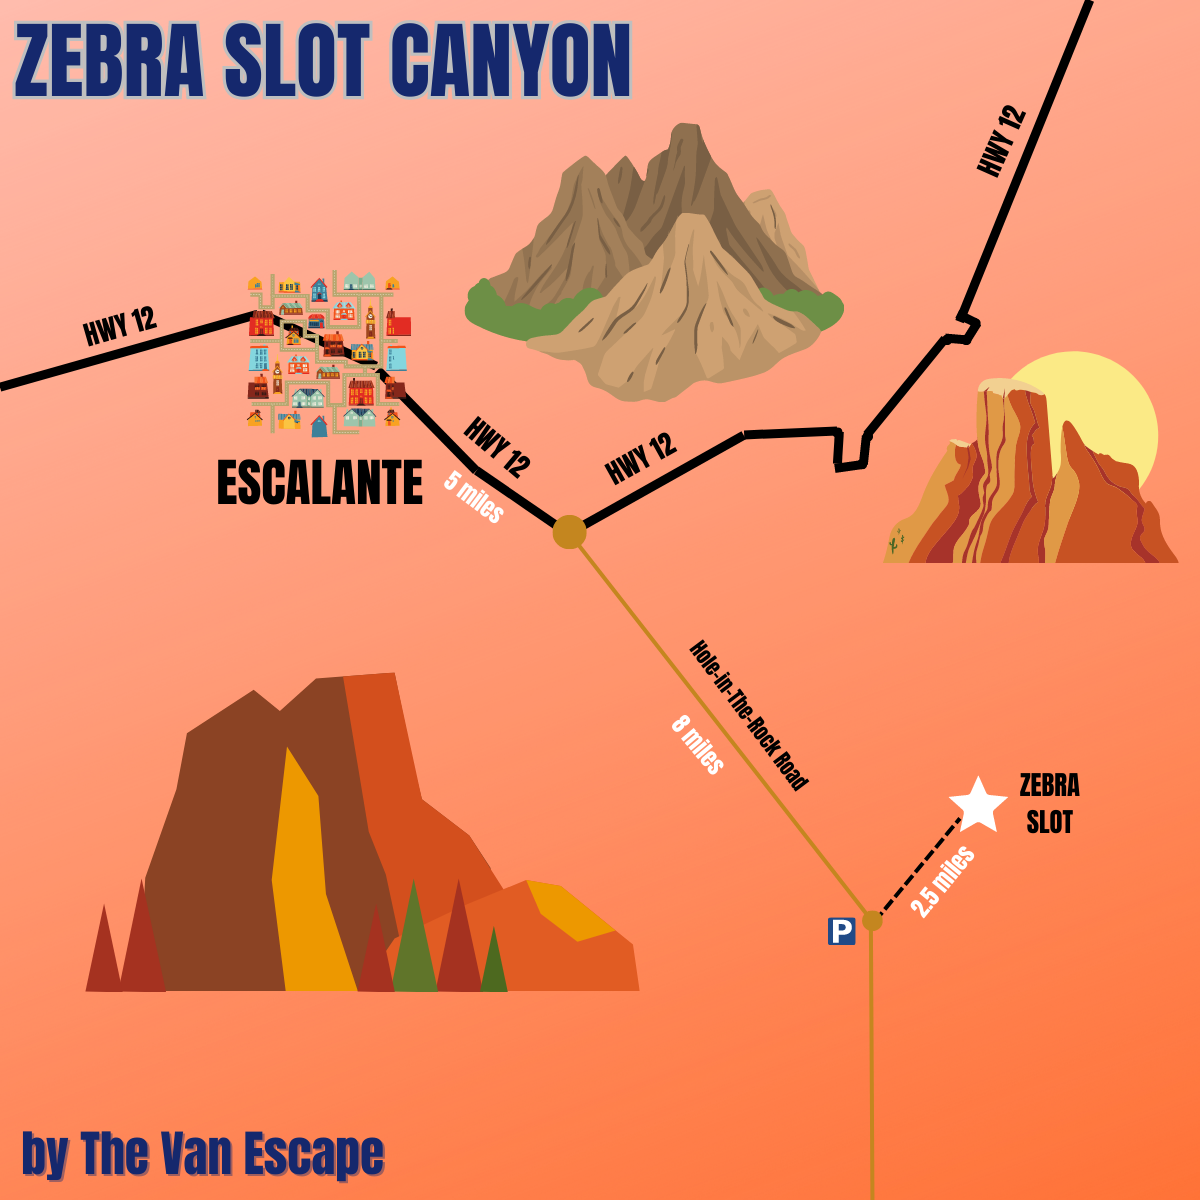 Zebra Slot Canyon infographic on how to get to the trailhead